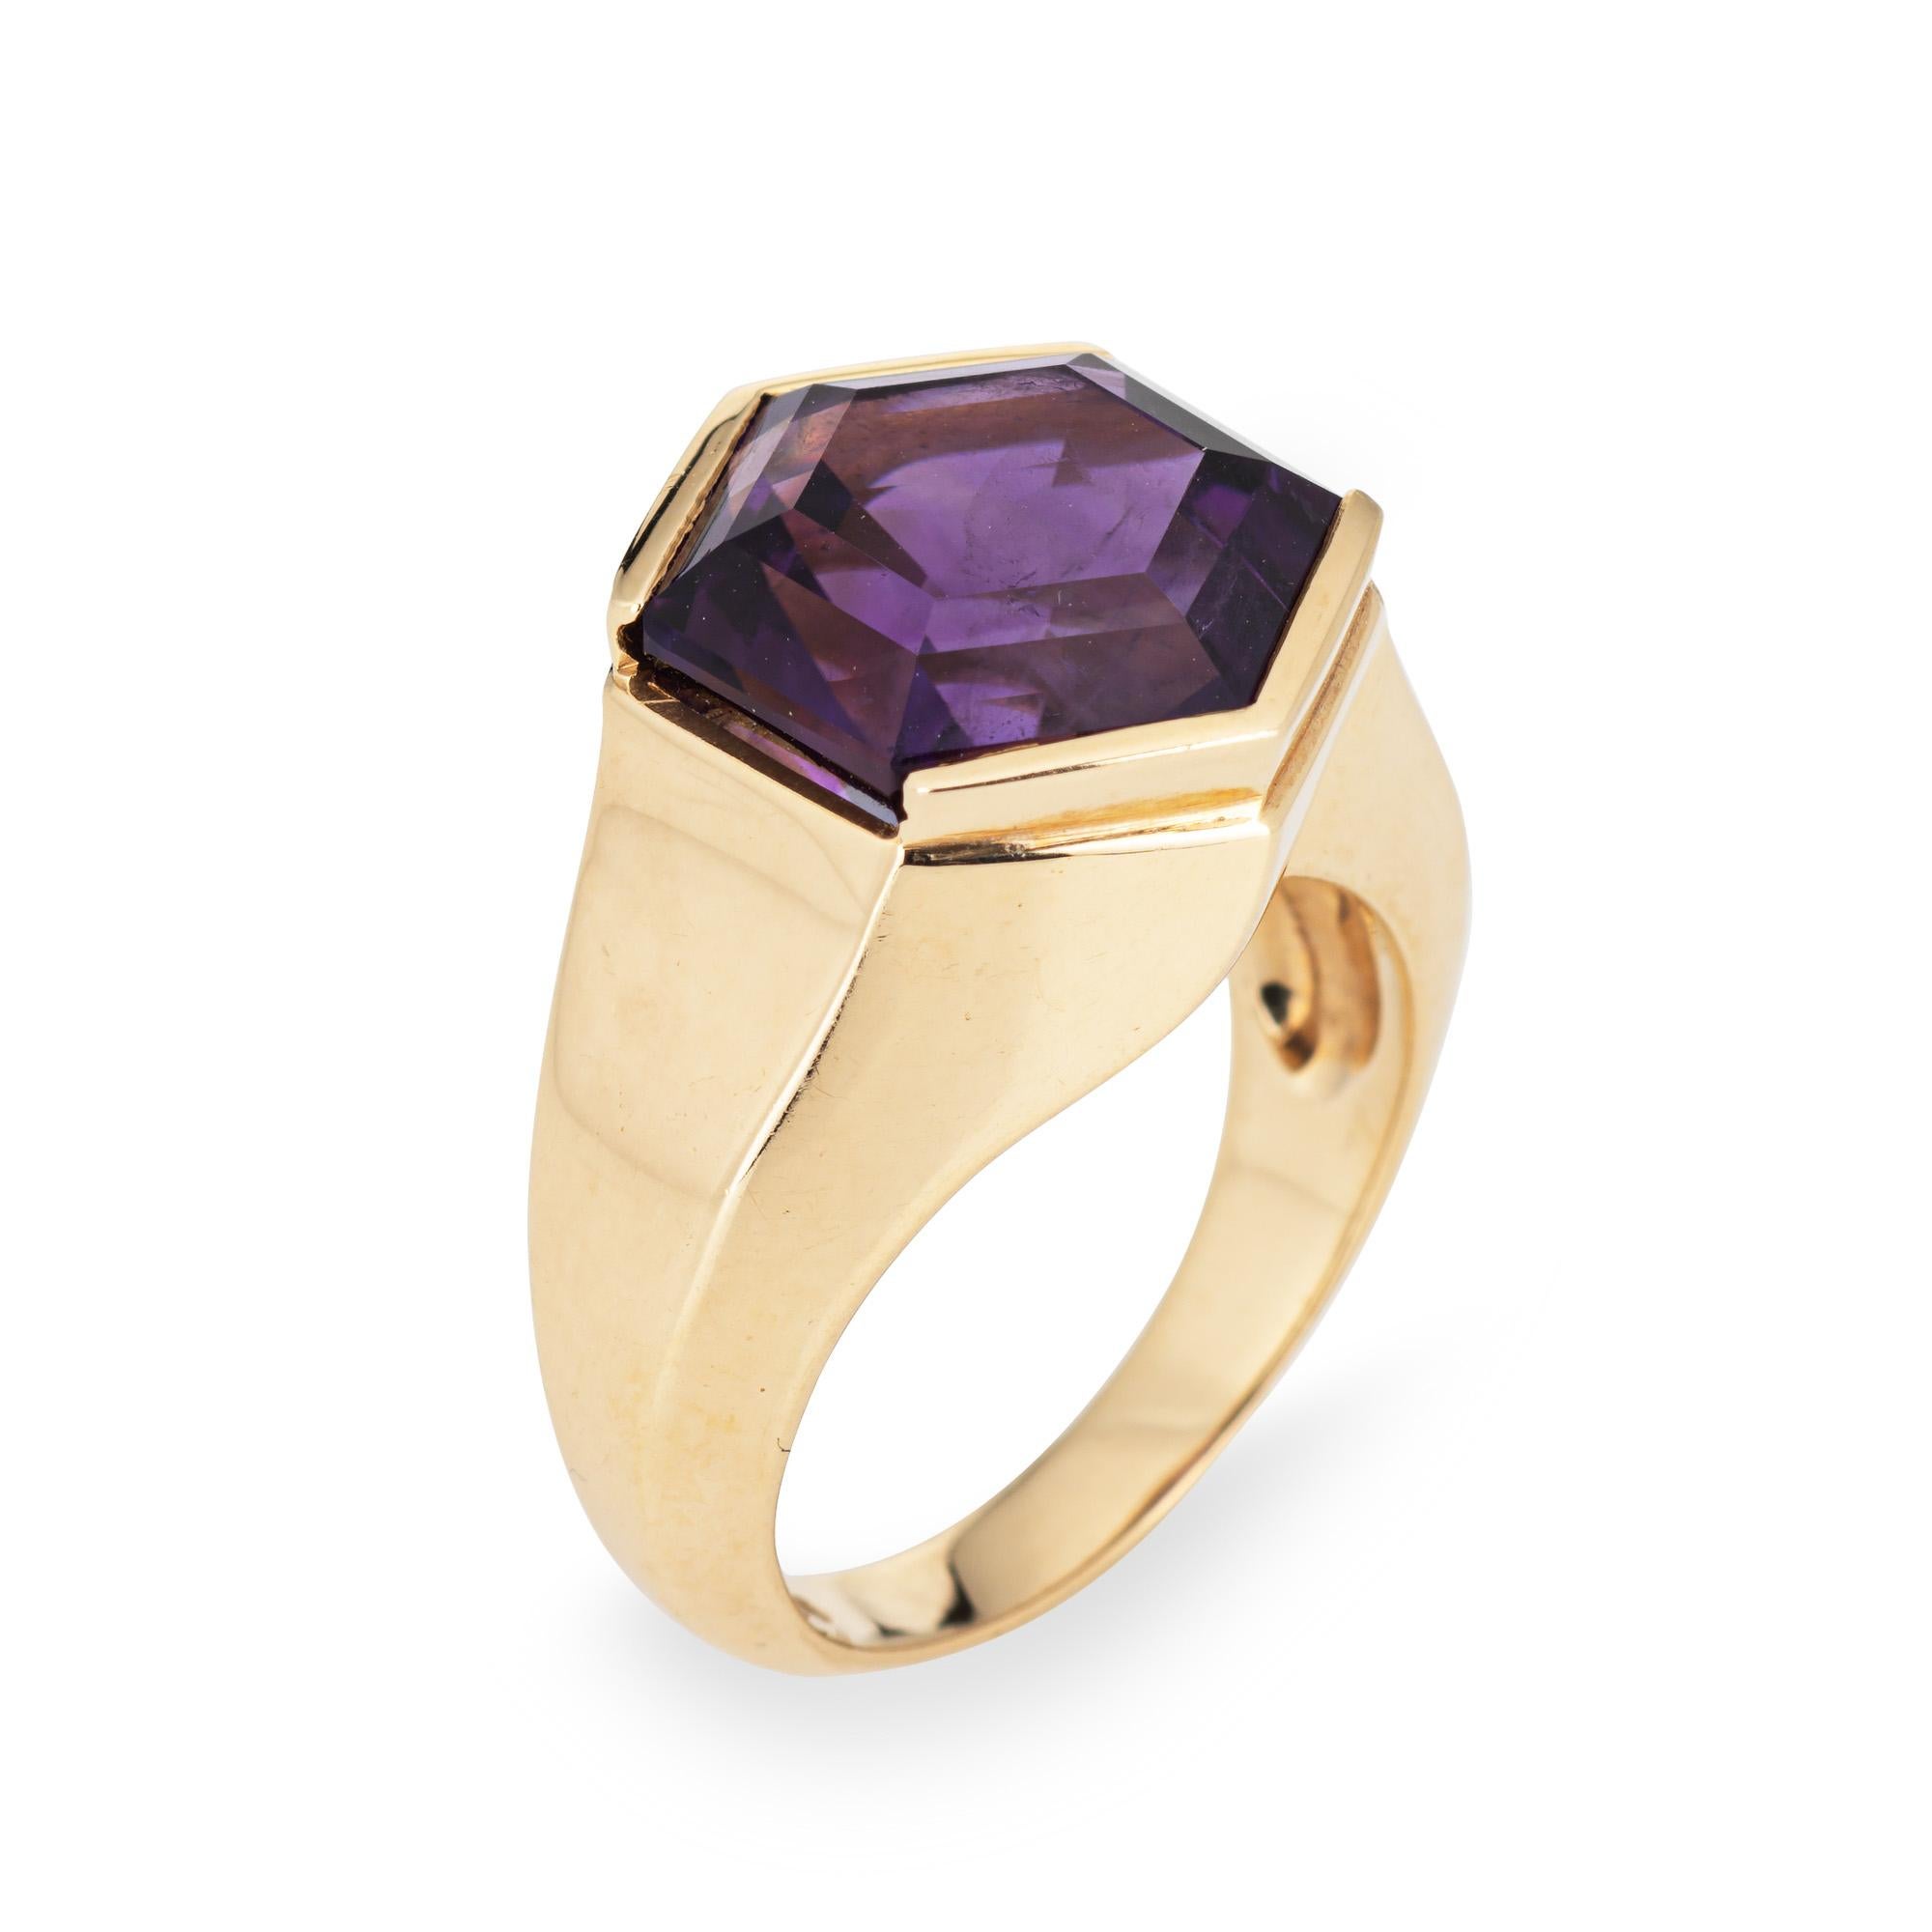 Vintage amethyst ring crafted in 14k yellow gold (circa 1980s).  

Hexagonal cut amethyst measures 13mm diameter. The amethyst is in very good condition and free of cracks or chips. 

The stylish hexagonal shaped ring makes a great statement on the